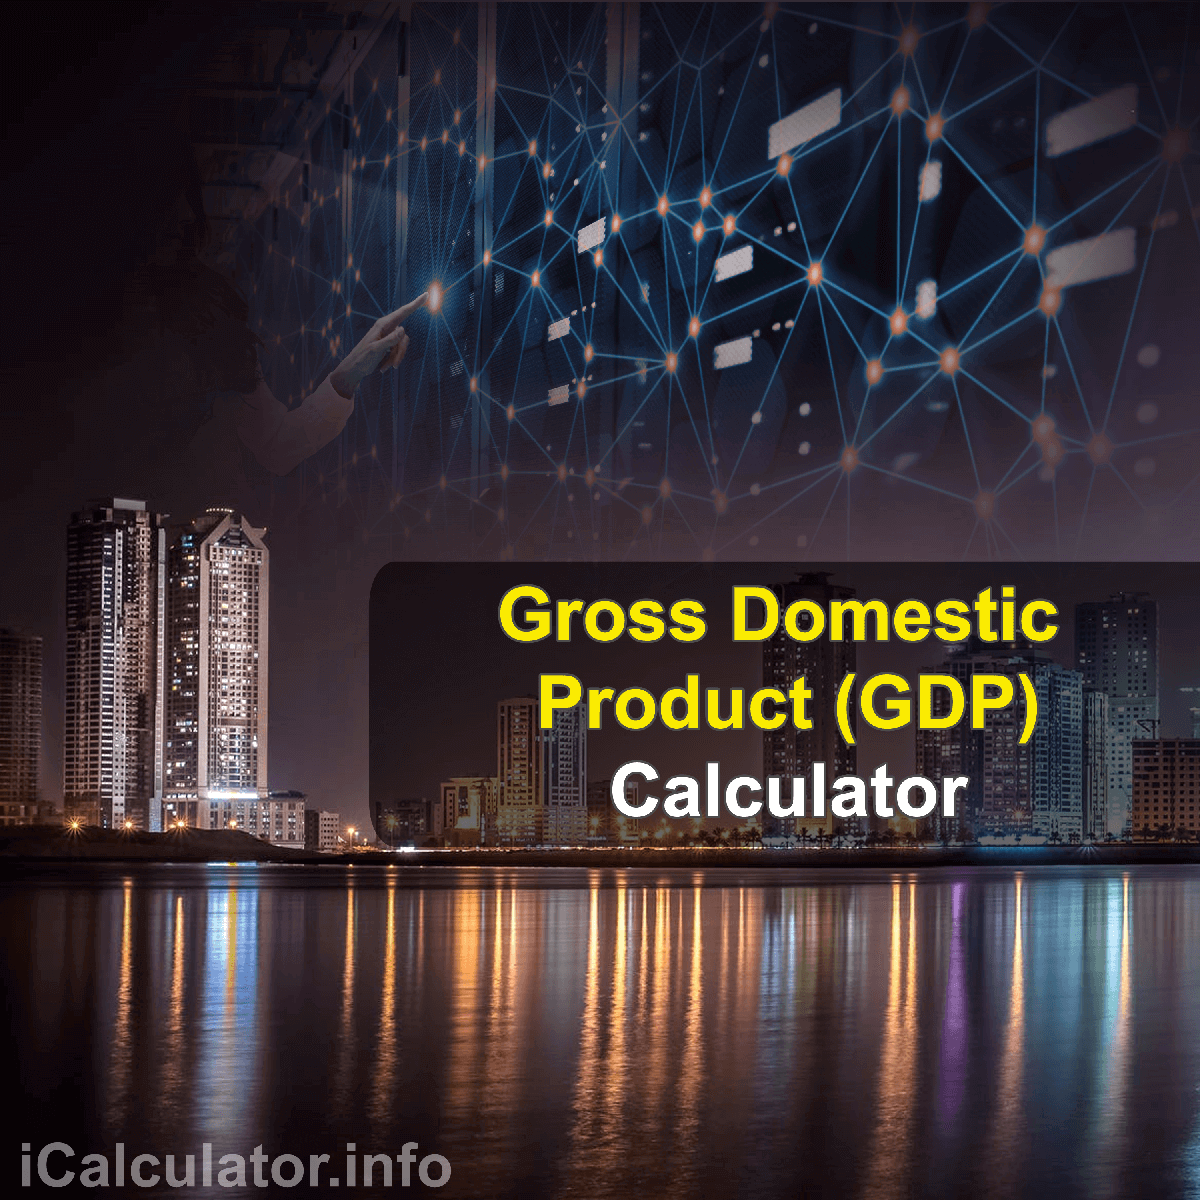 GDP Calculator. This image provides details of how to calculate gross domestic product using a good calculator and notepad. By using the either of the gdp formulas, the GDP Calculator provides a true calculation of the total monetary value of all the goods and services that are produced in a country over a specified period